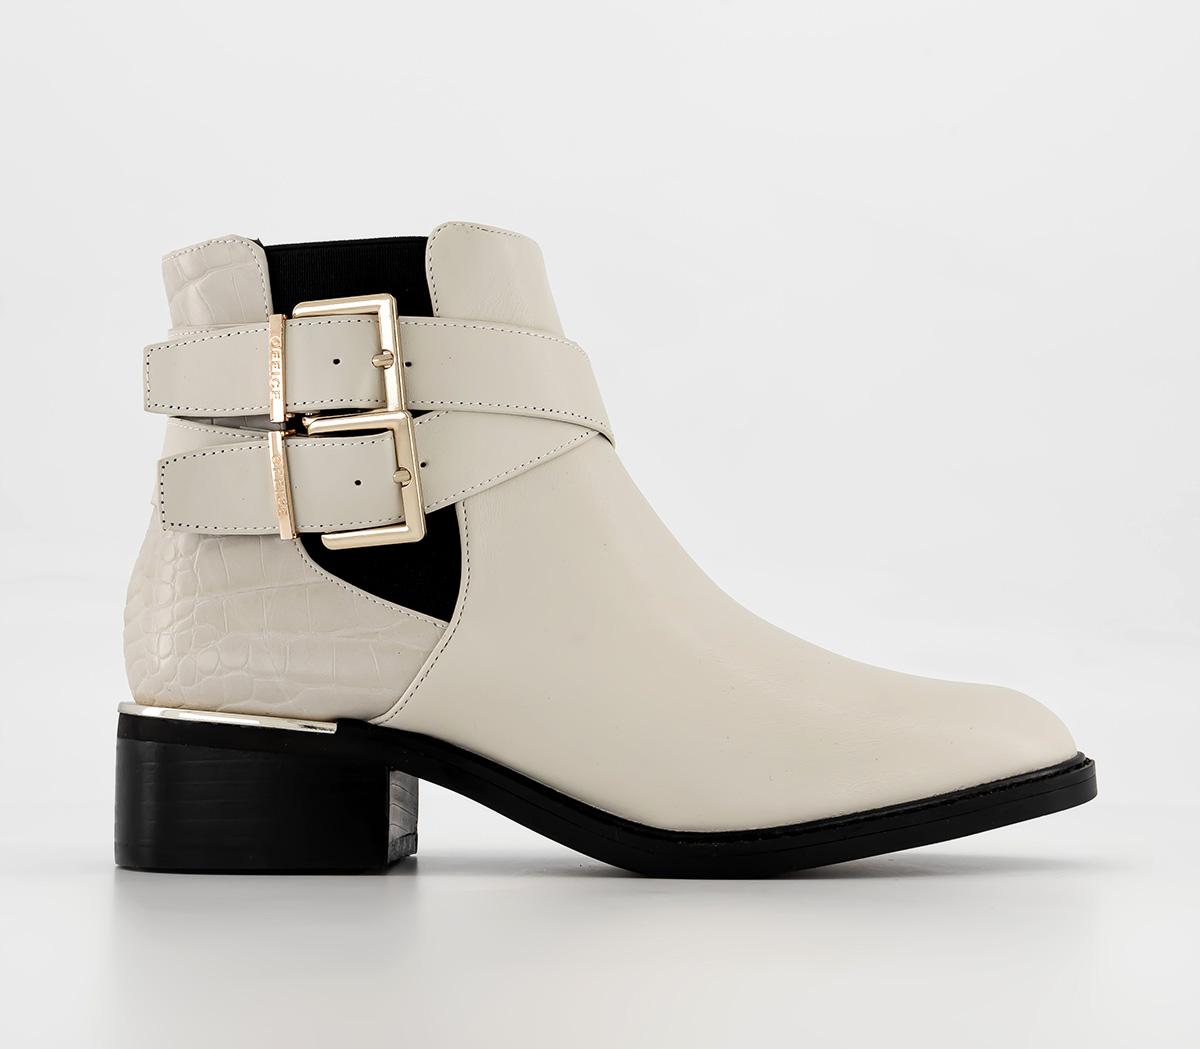 OFFICEWide Fit Ana-Maria Buckle Strap Ankle BootsCream